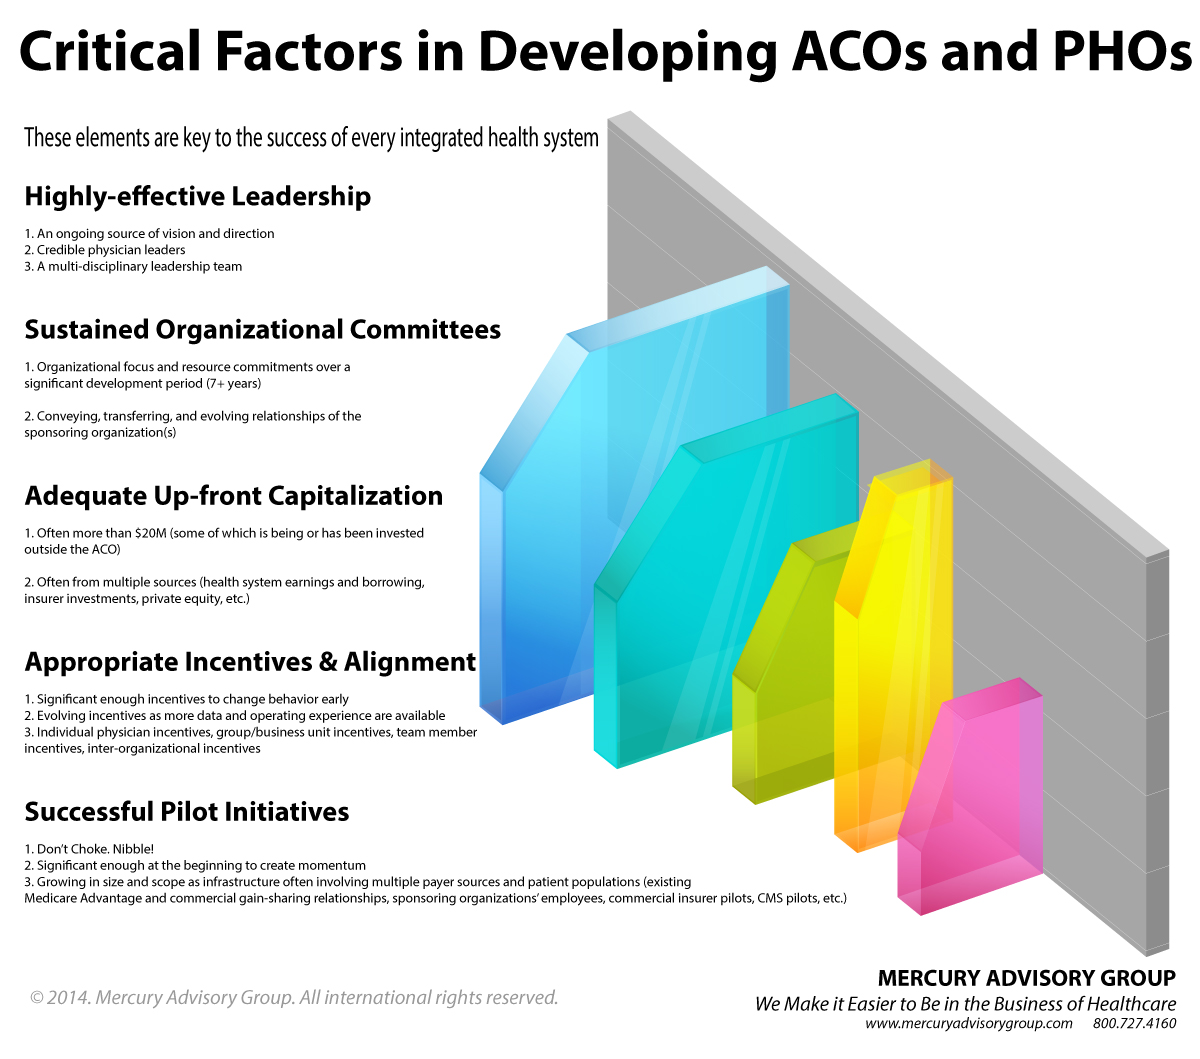 IFNOGRAPHIC: Critical Success Factors for ACOs and PHOs